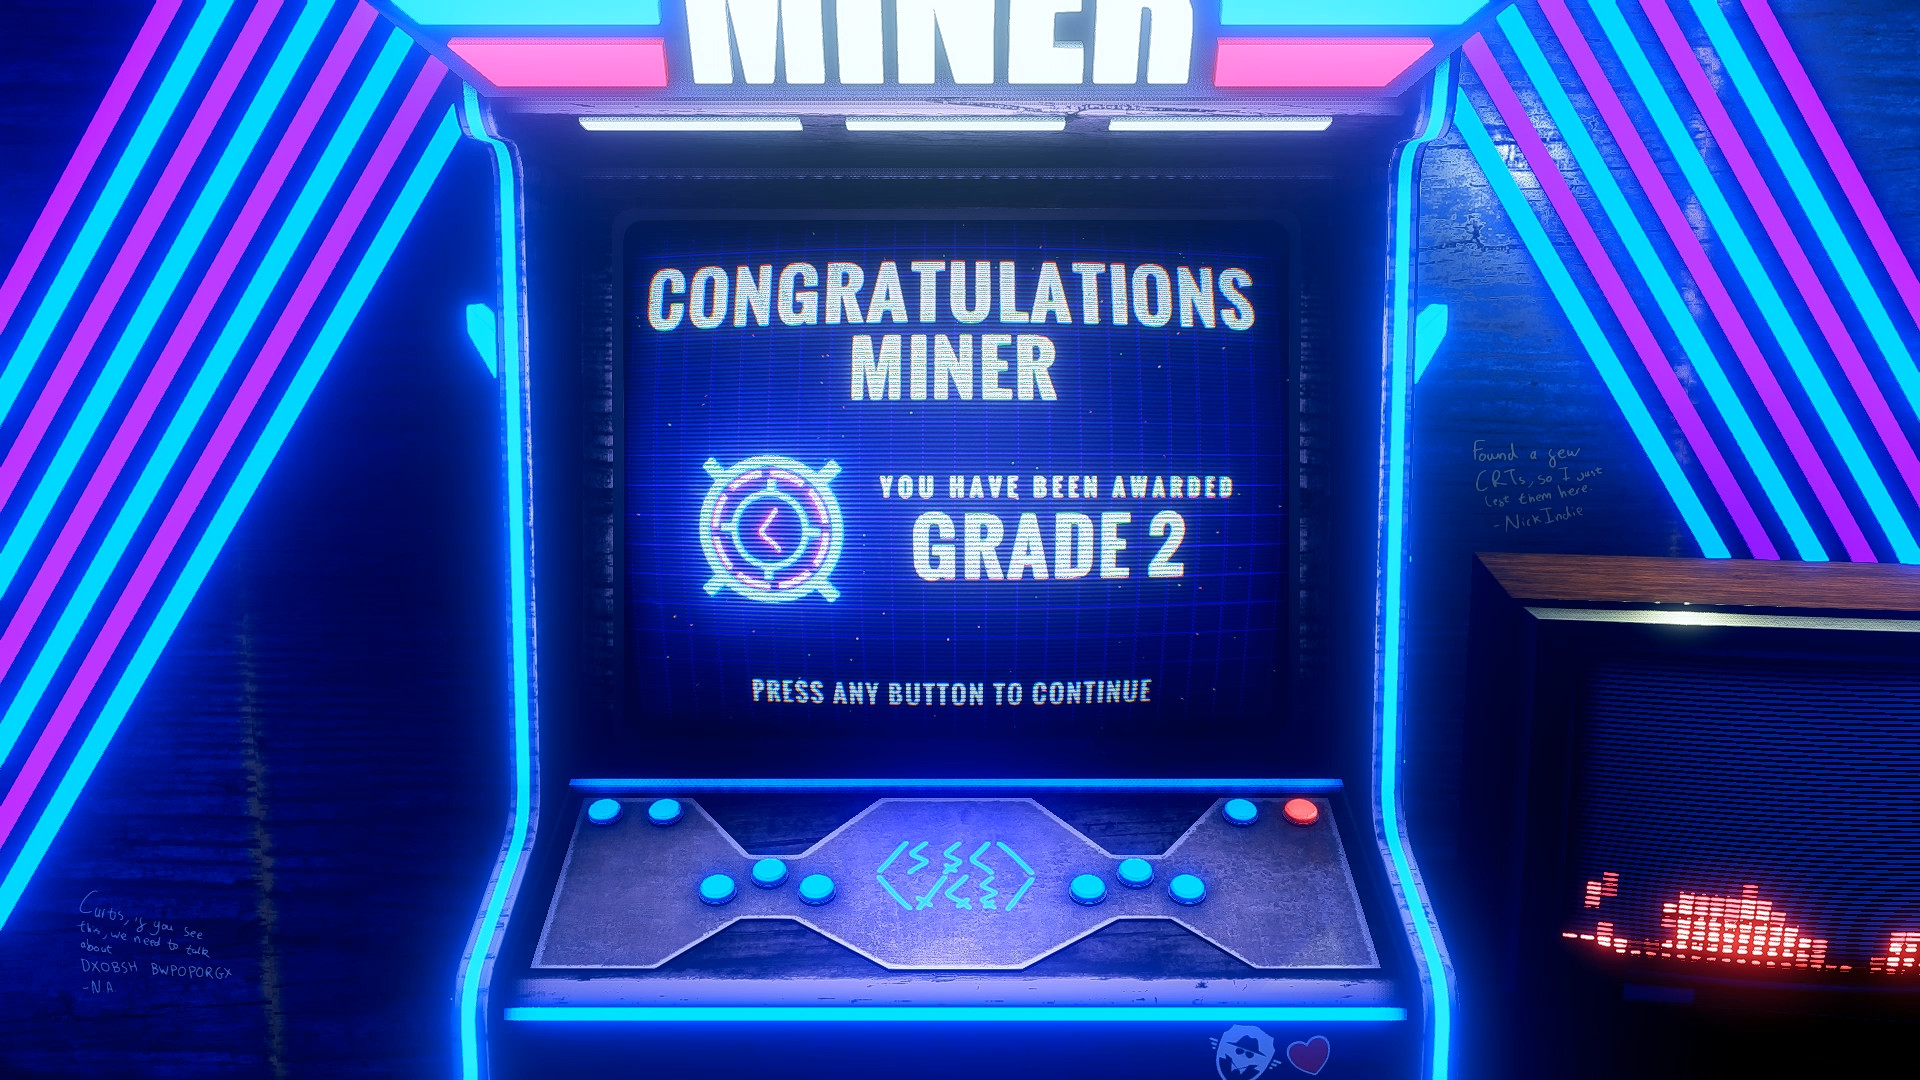 Our Nation's Miner screenshot